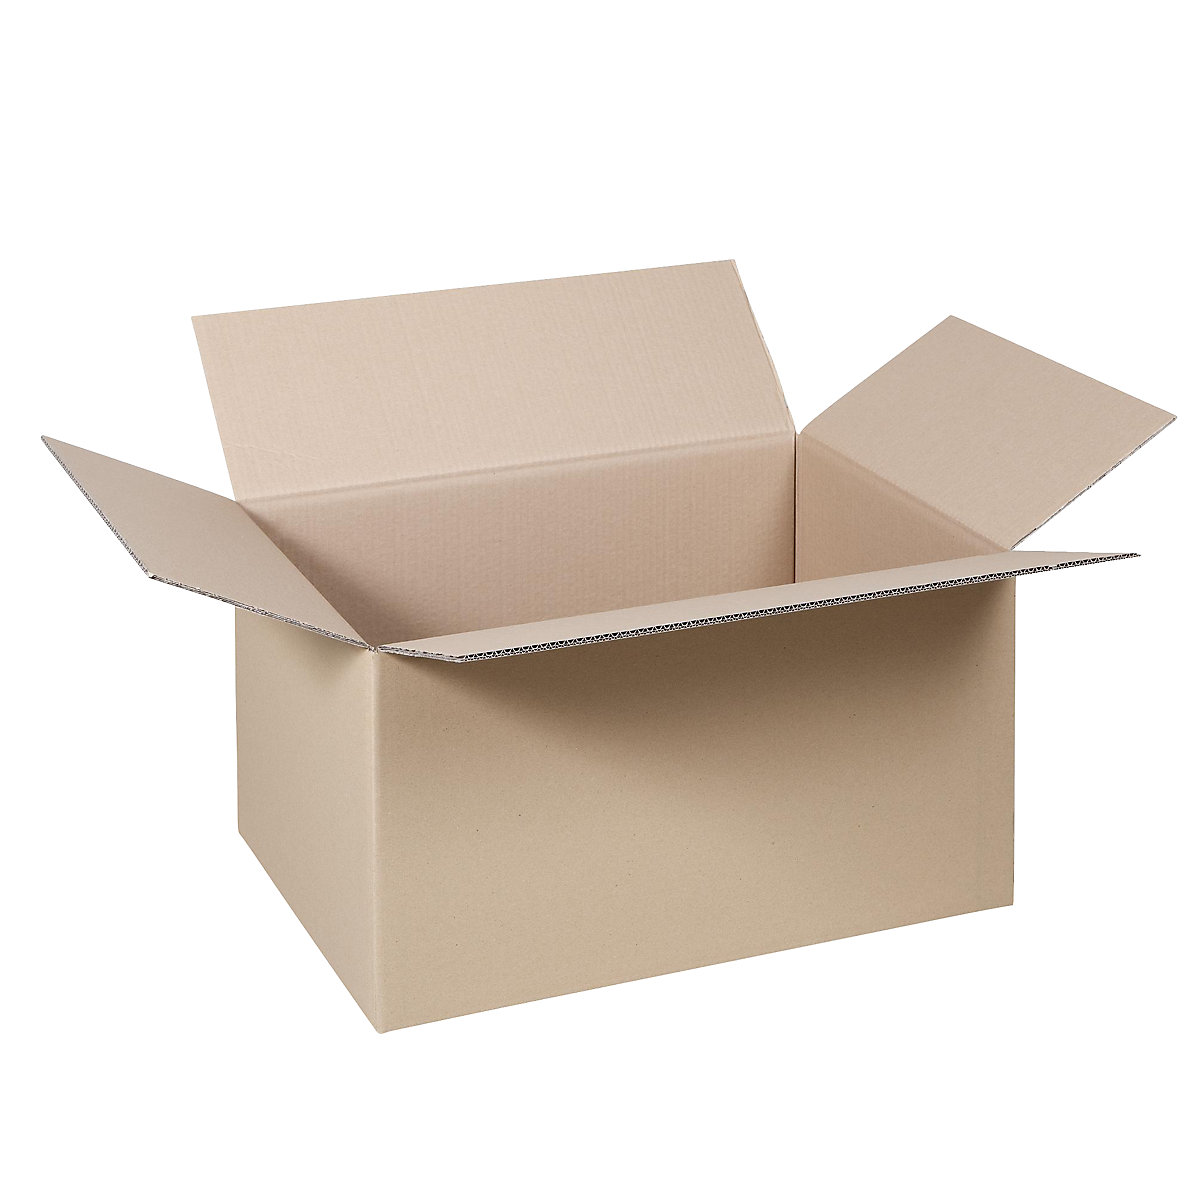 Folding cardboard box, FEFCO 0201, made of double fluted cardboard, internal dimensions 500 x 400 x 400 mm, pack of 50-25